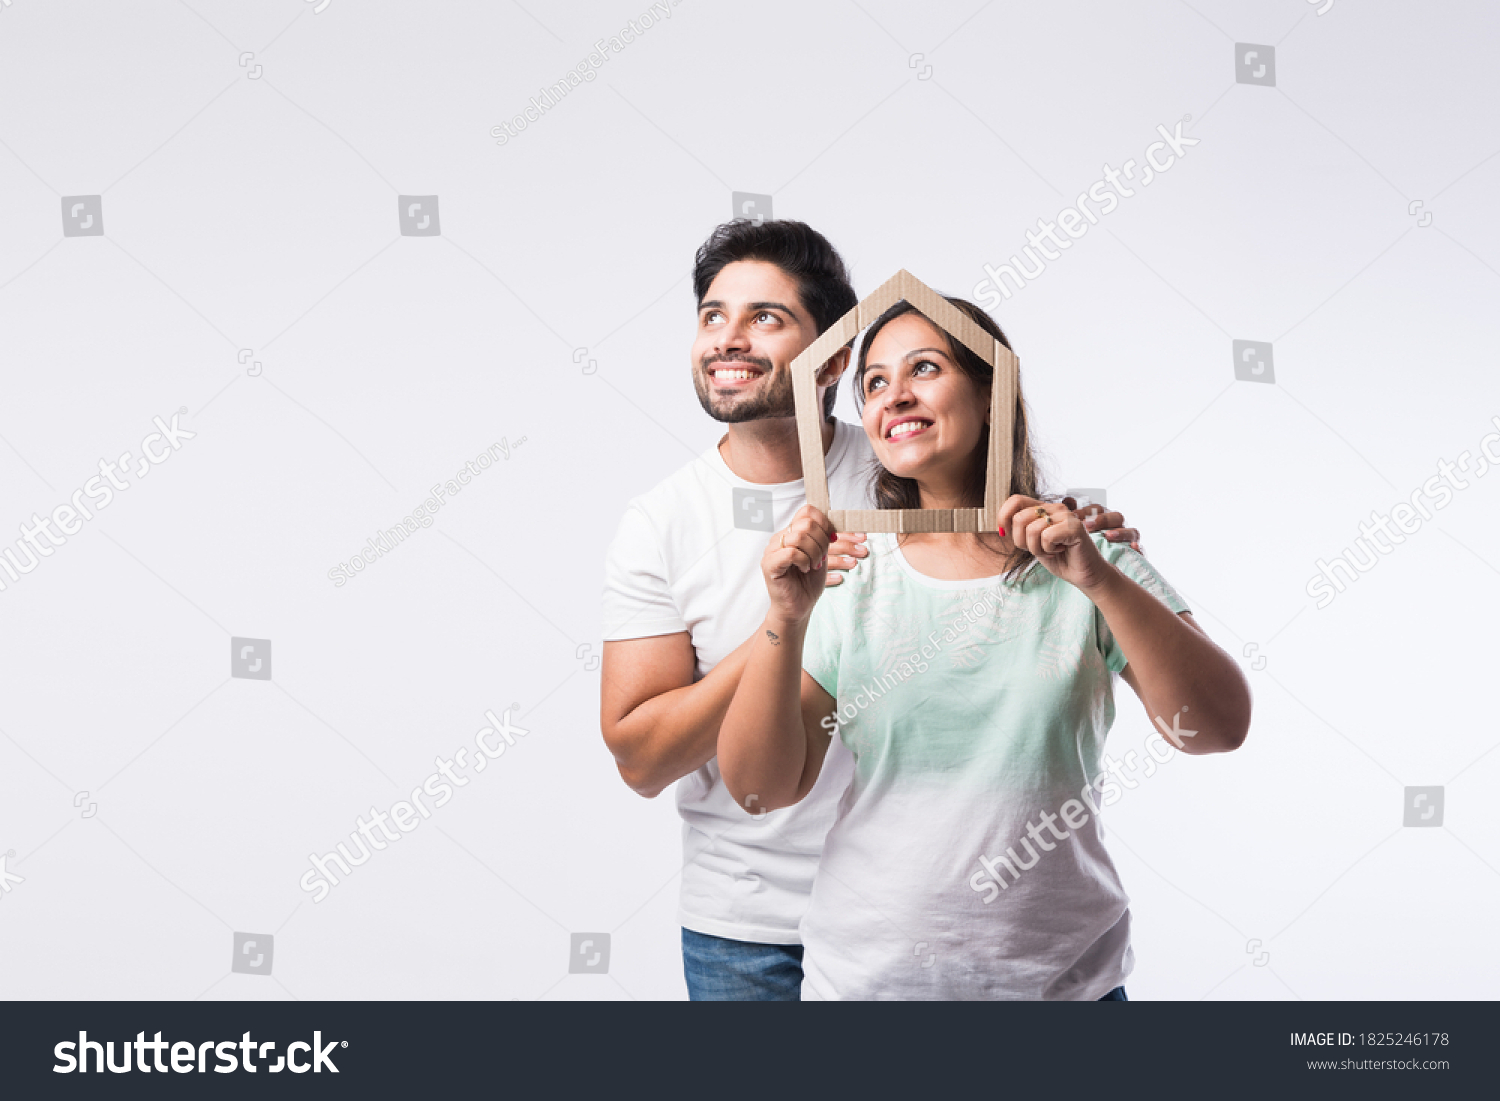 Indian young family couple and real estate concept - buying or rental, standing against white background #1825246178